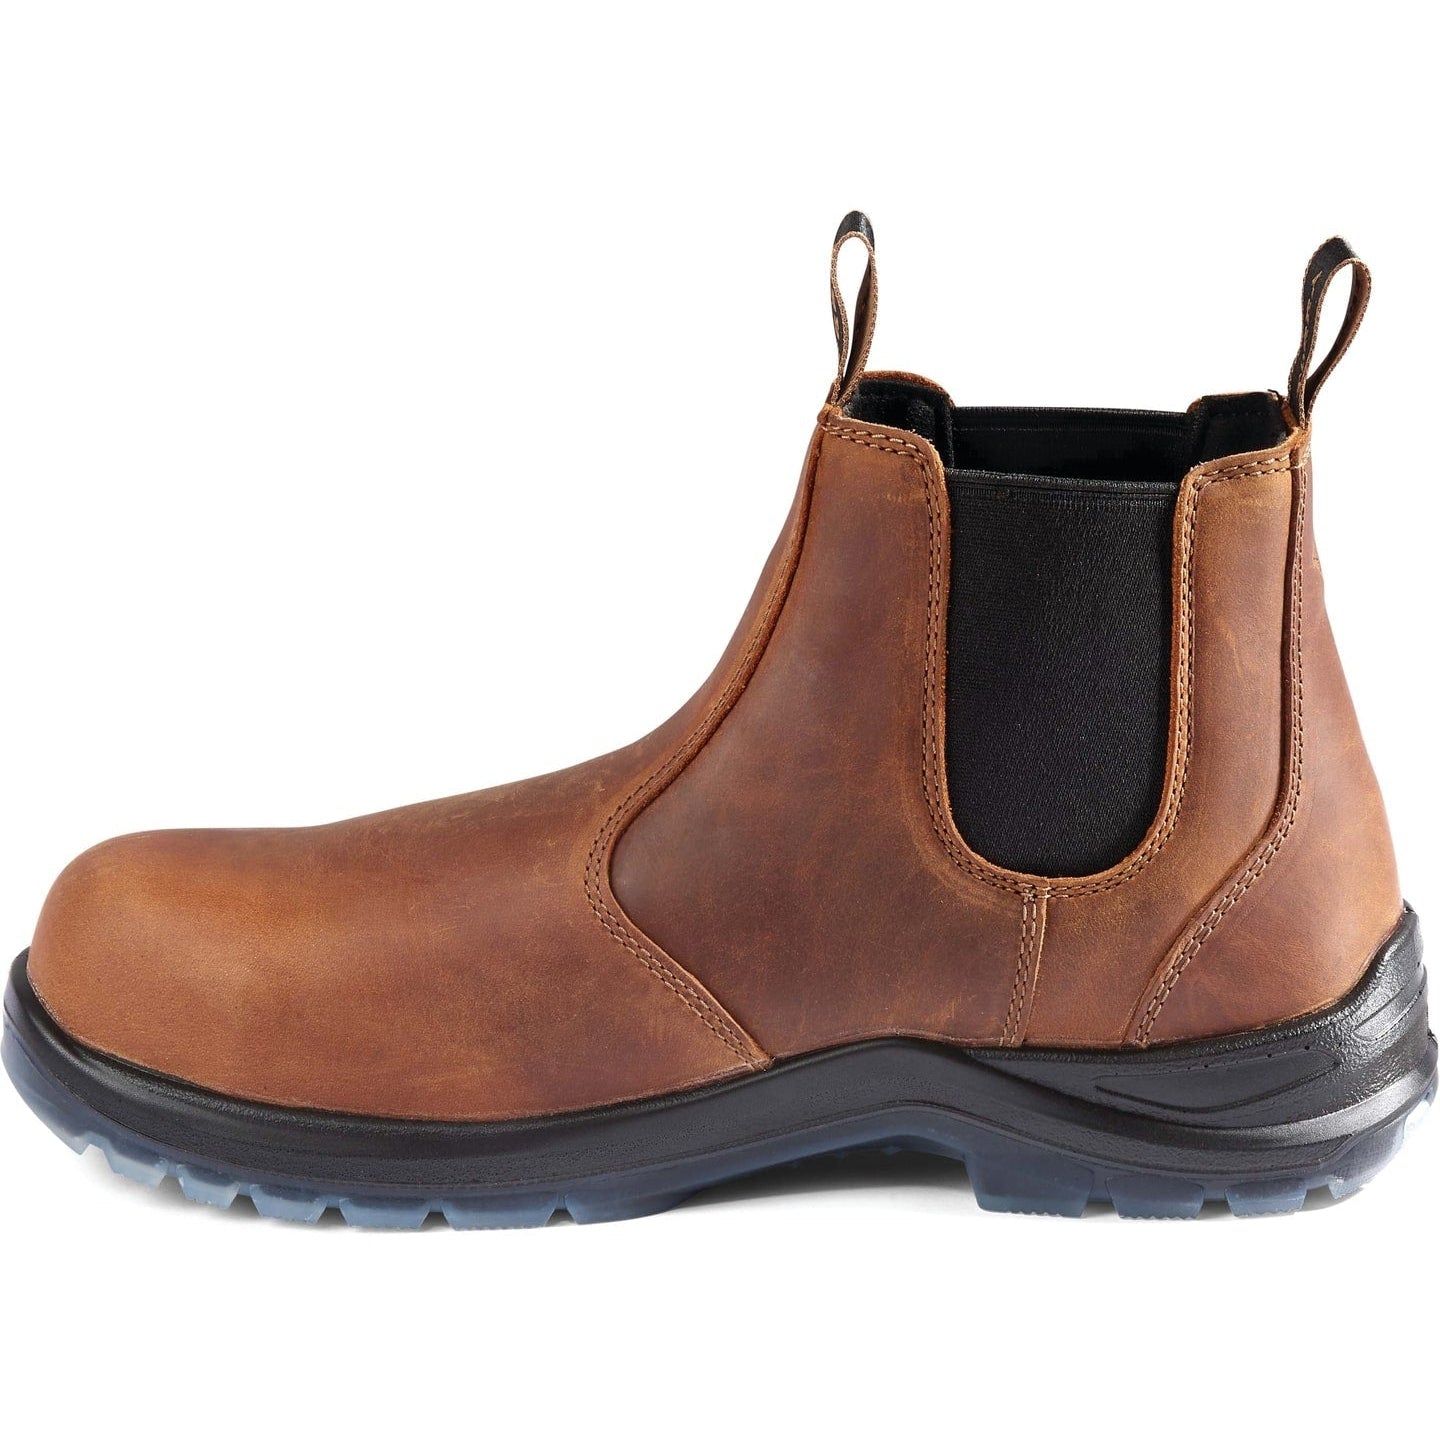 Terra Men's Murphy 6" Comp Toe Pull On WP Safety Work Boot -Brown- R4NRBN  - Overlook Boots